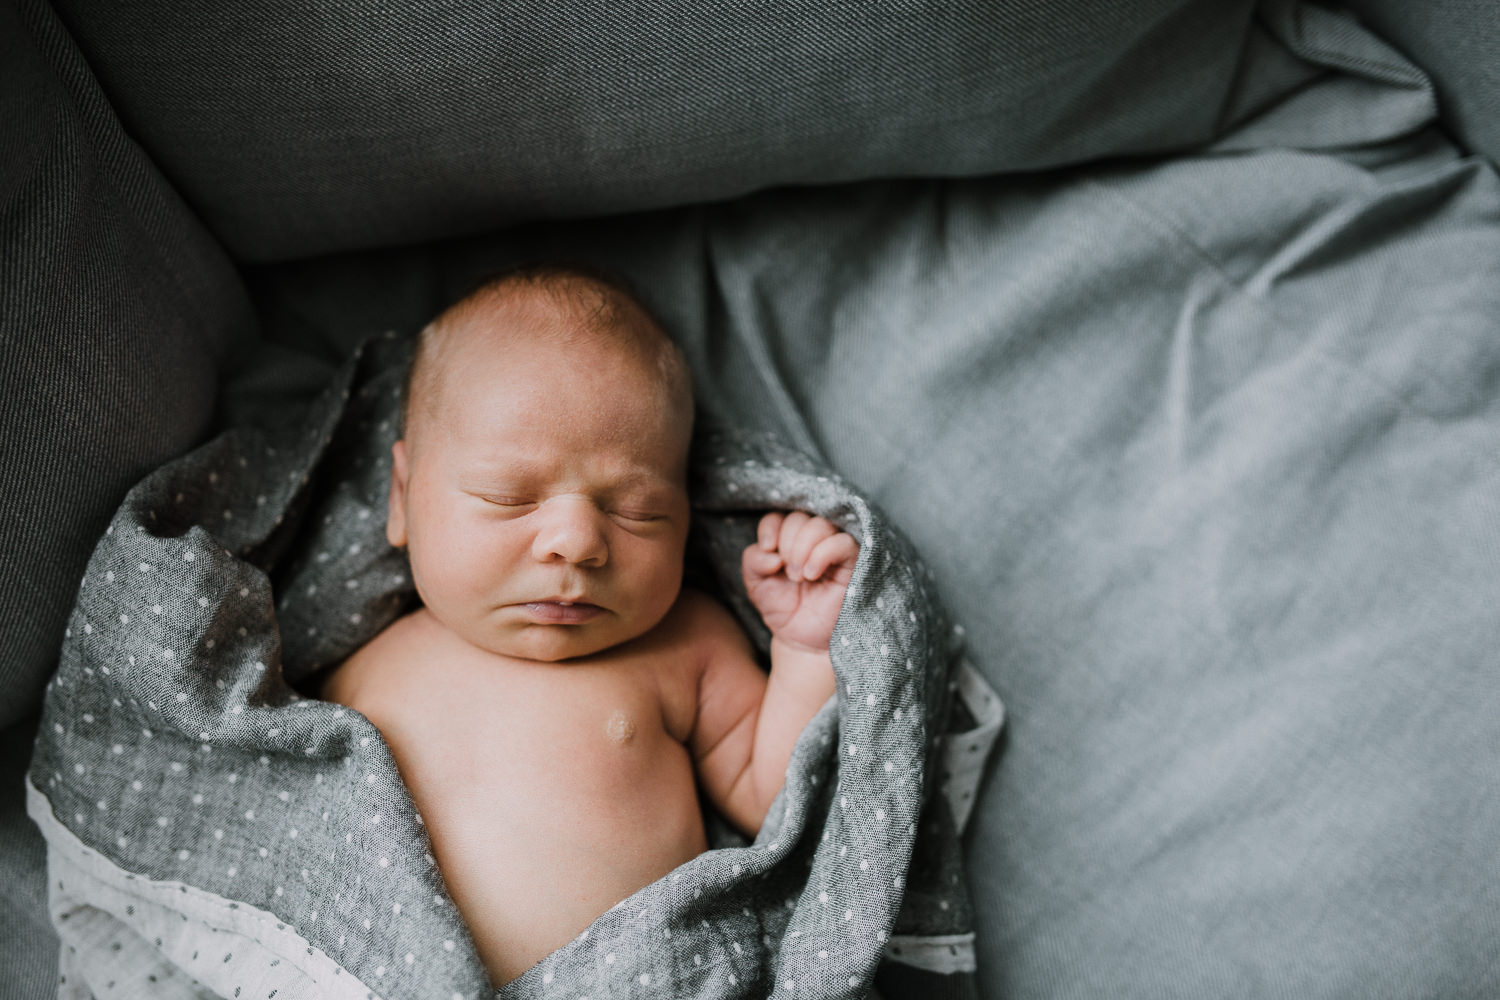 10 day old baby boy in loose swaddle asleep on couch - Barrie Lifestyle Family Photography